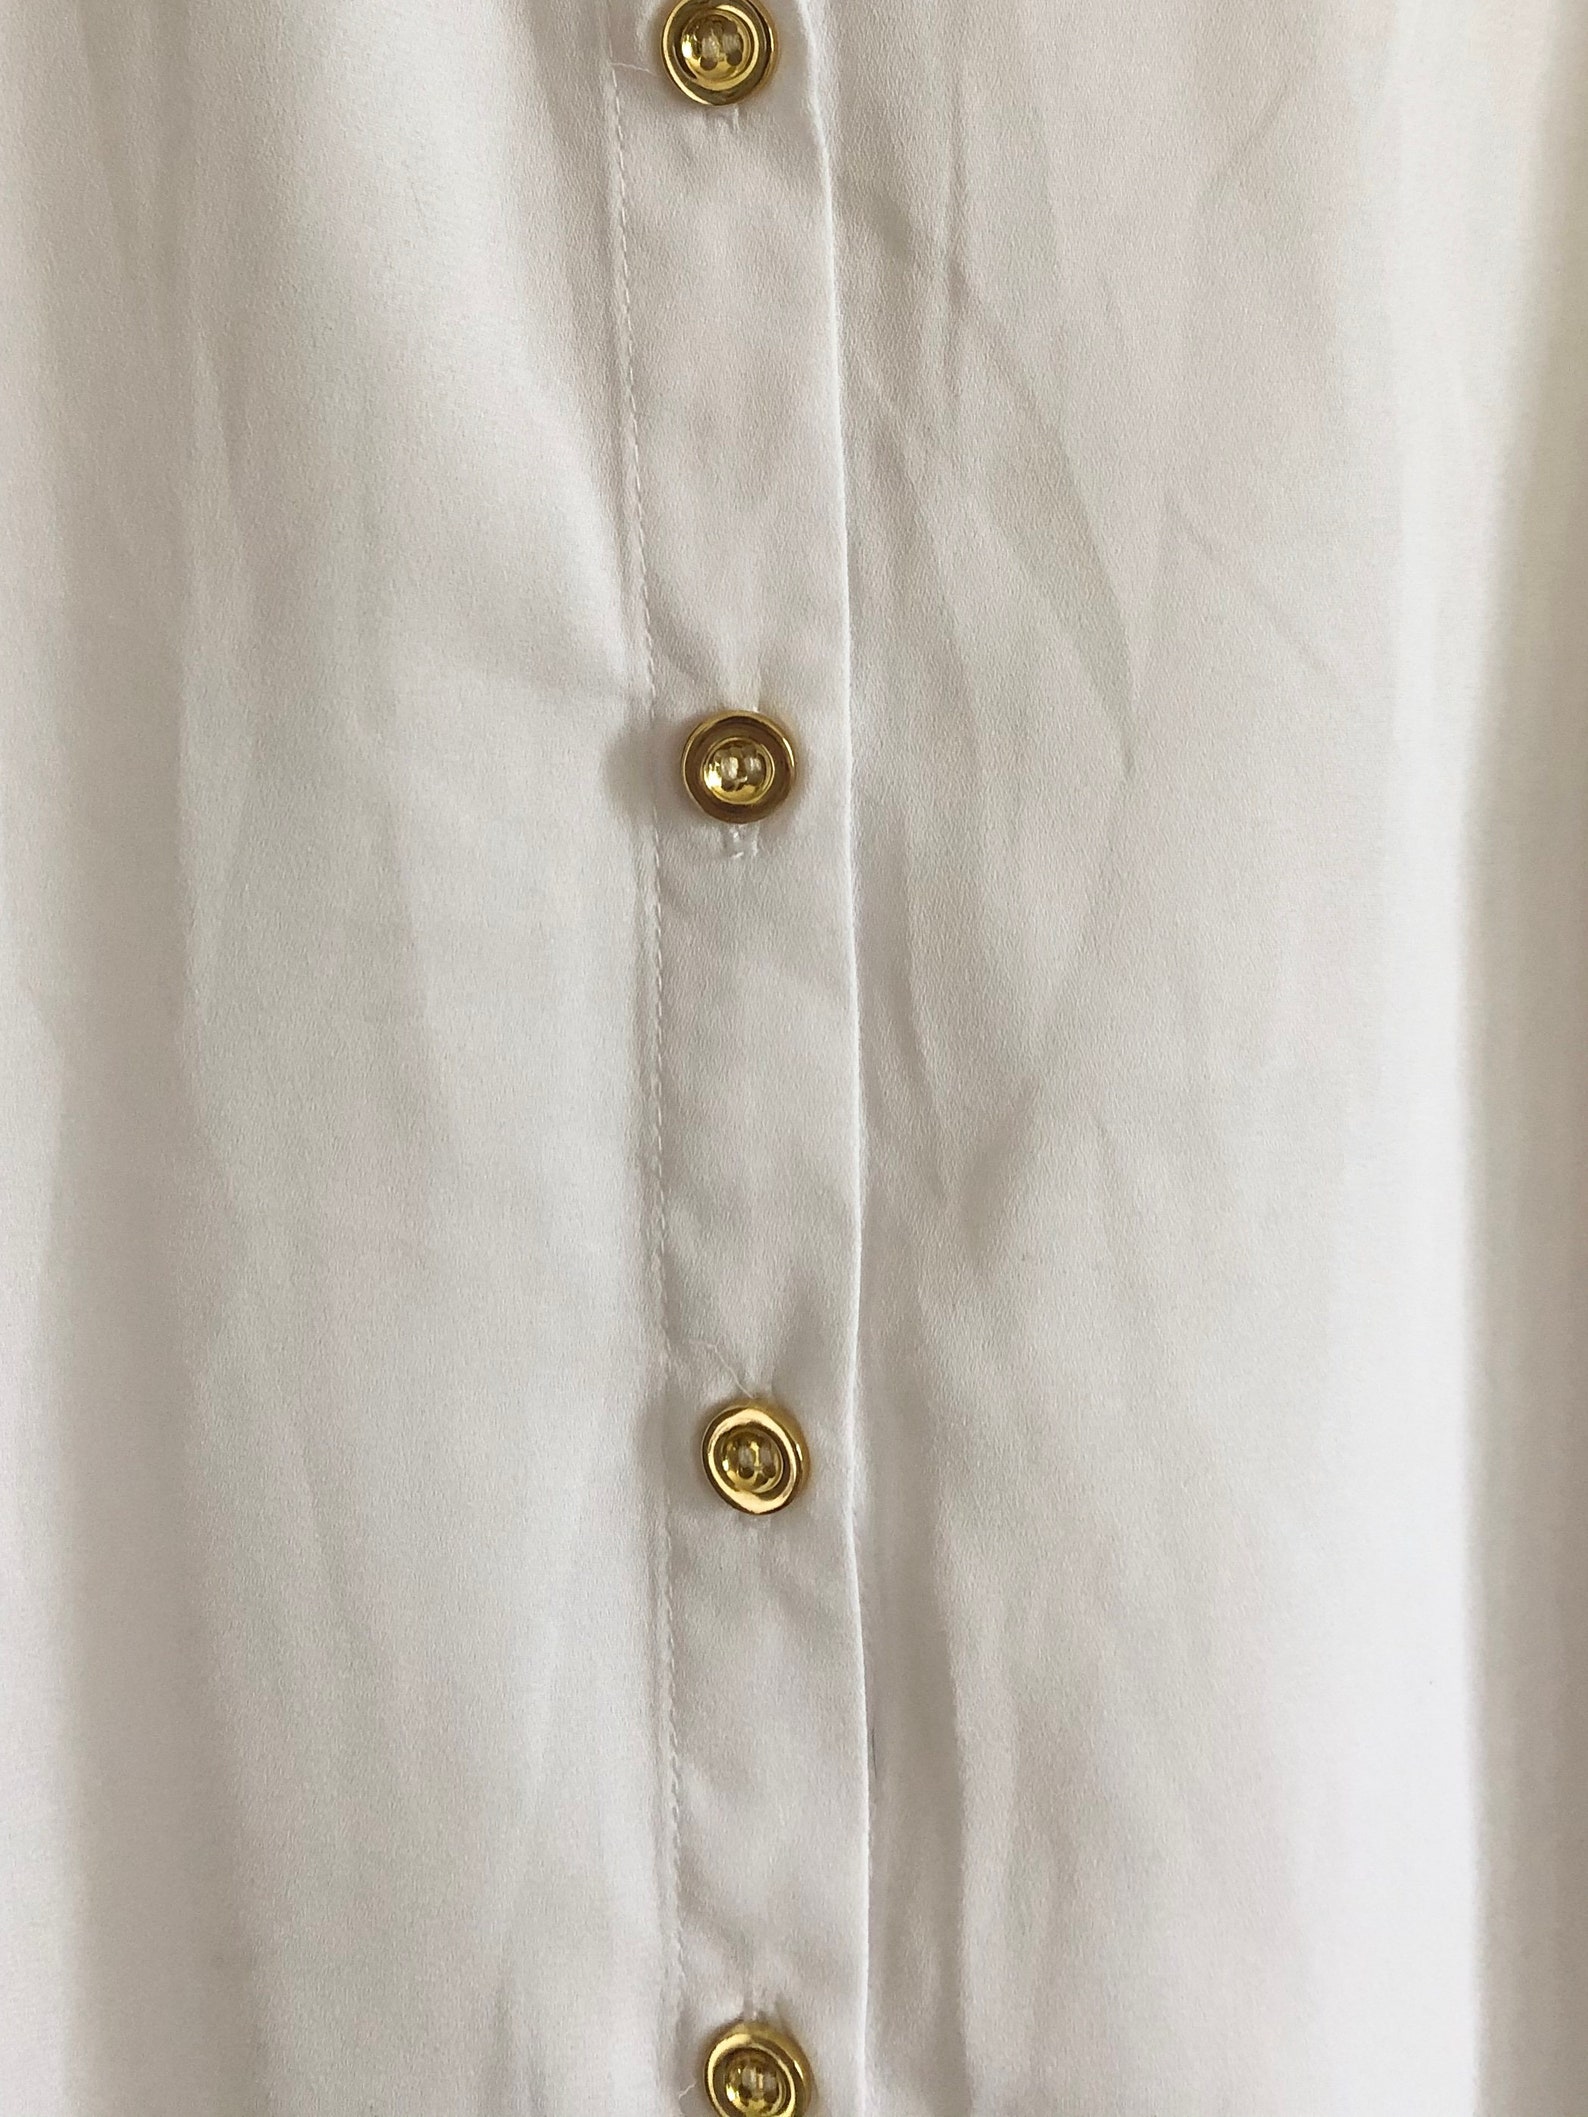 Thrifted White with Gold Buttons Formal Sleeveless Blouse Size | Etsy